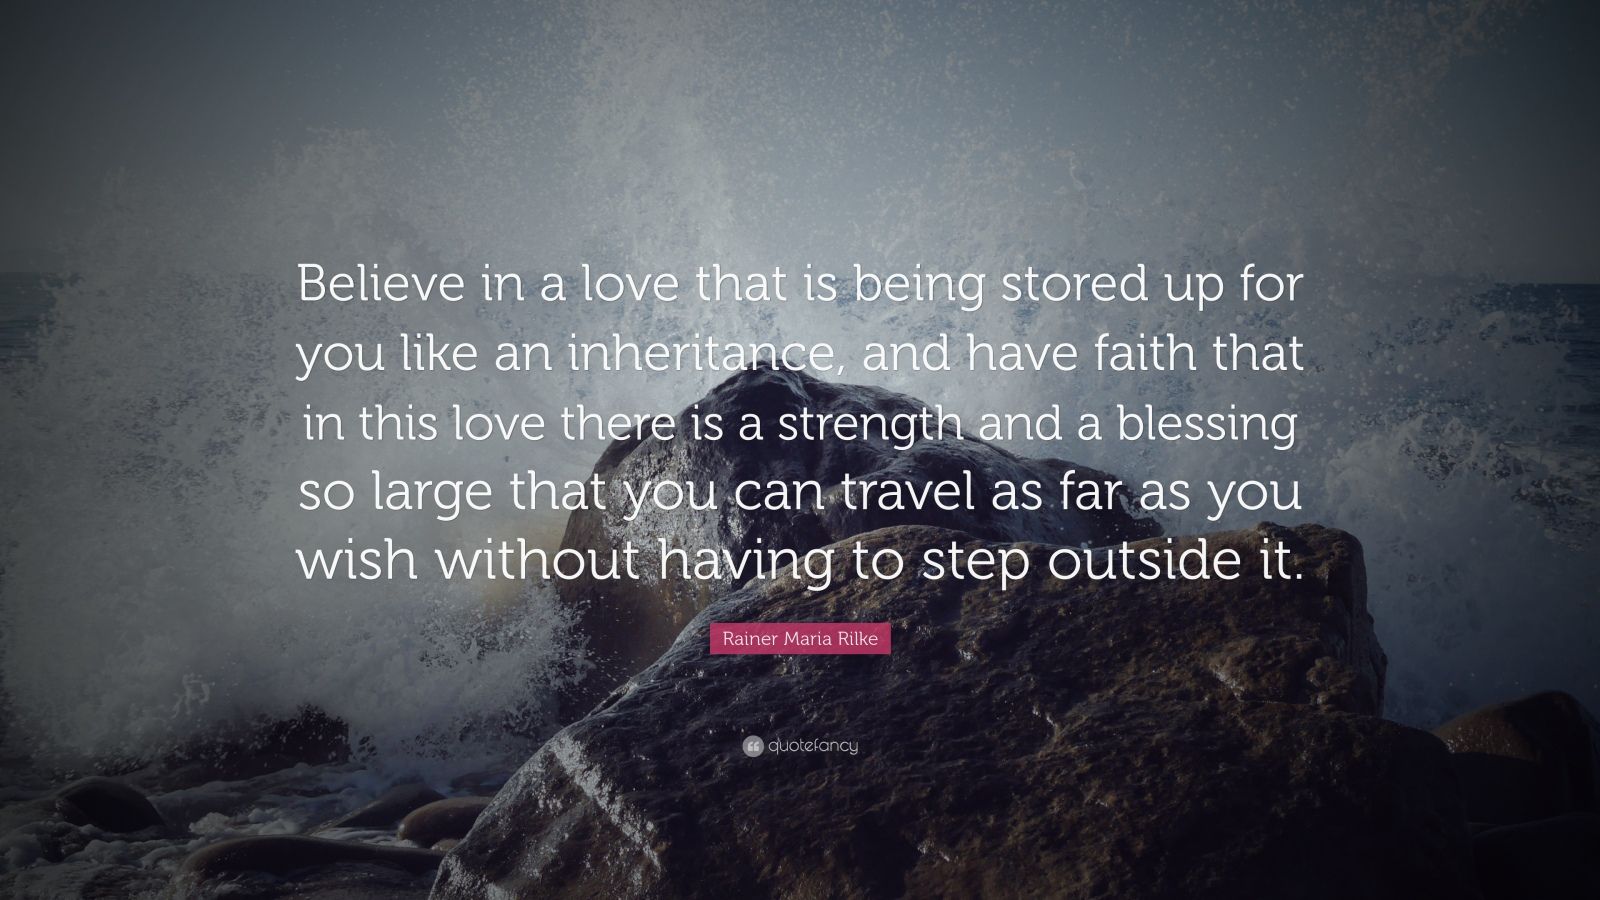 Rainer Maria Rilke Quote: “Believe in a love that is being stored up ...